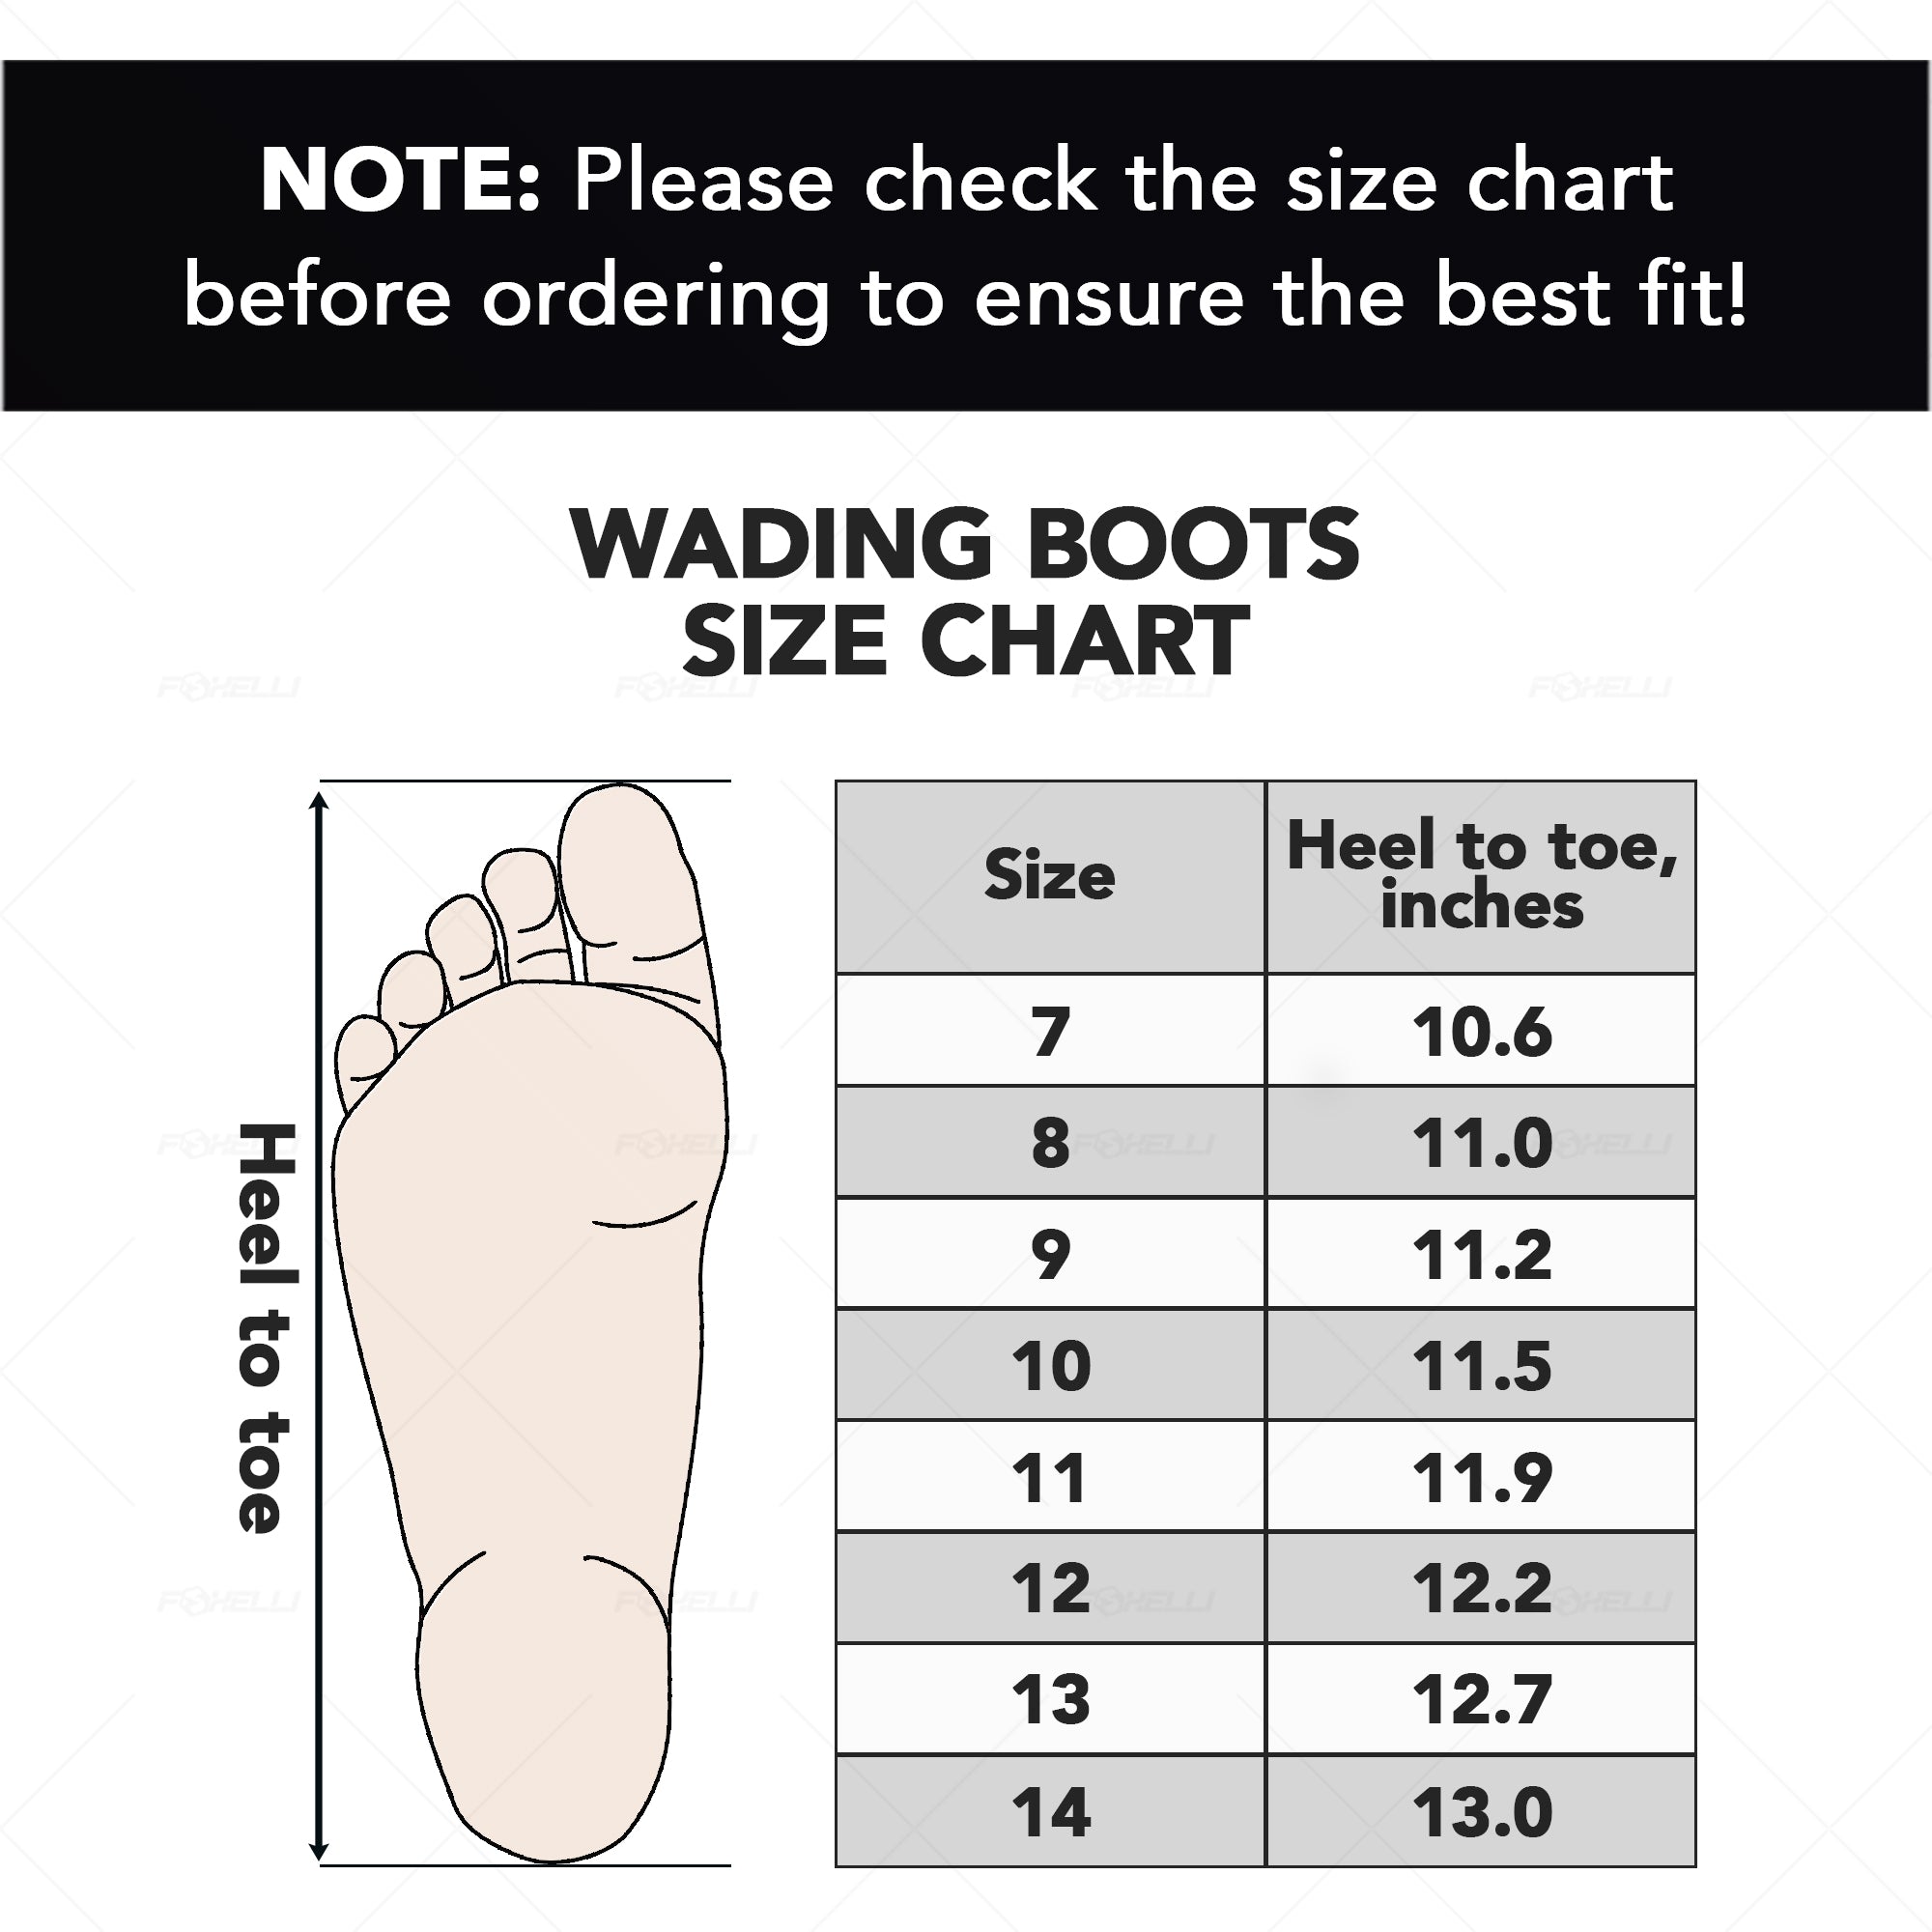 Wading Boots & Footwear Size Guide